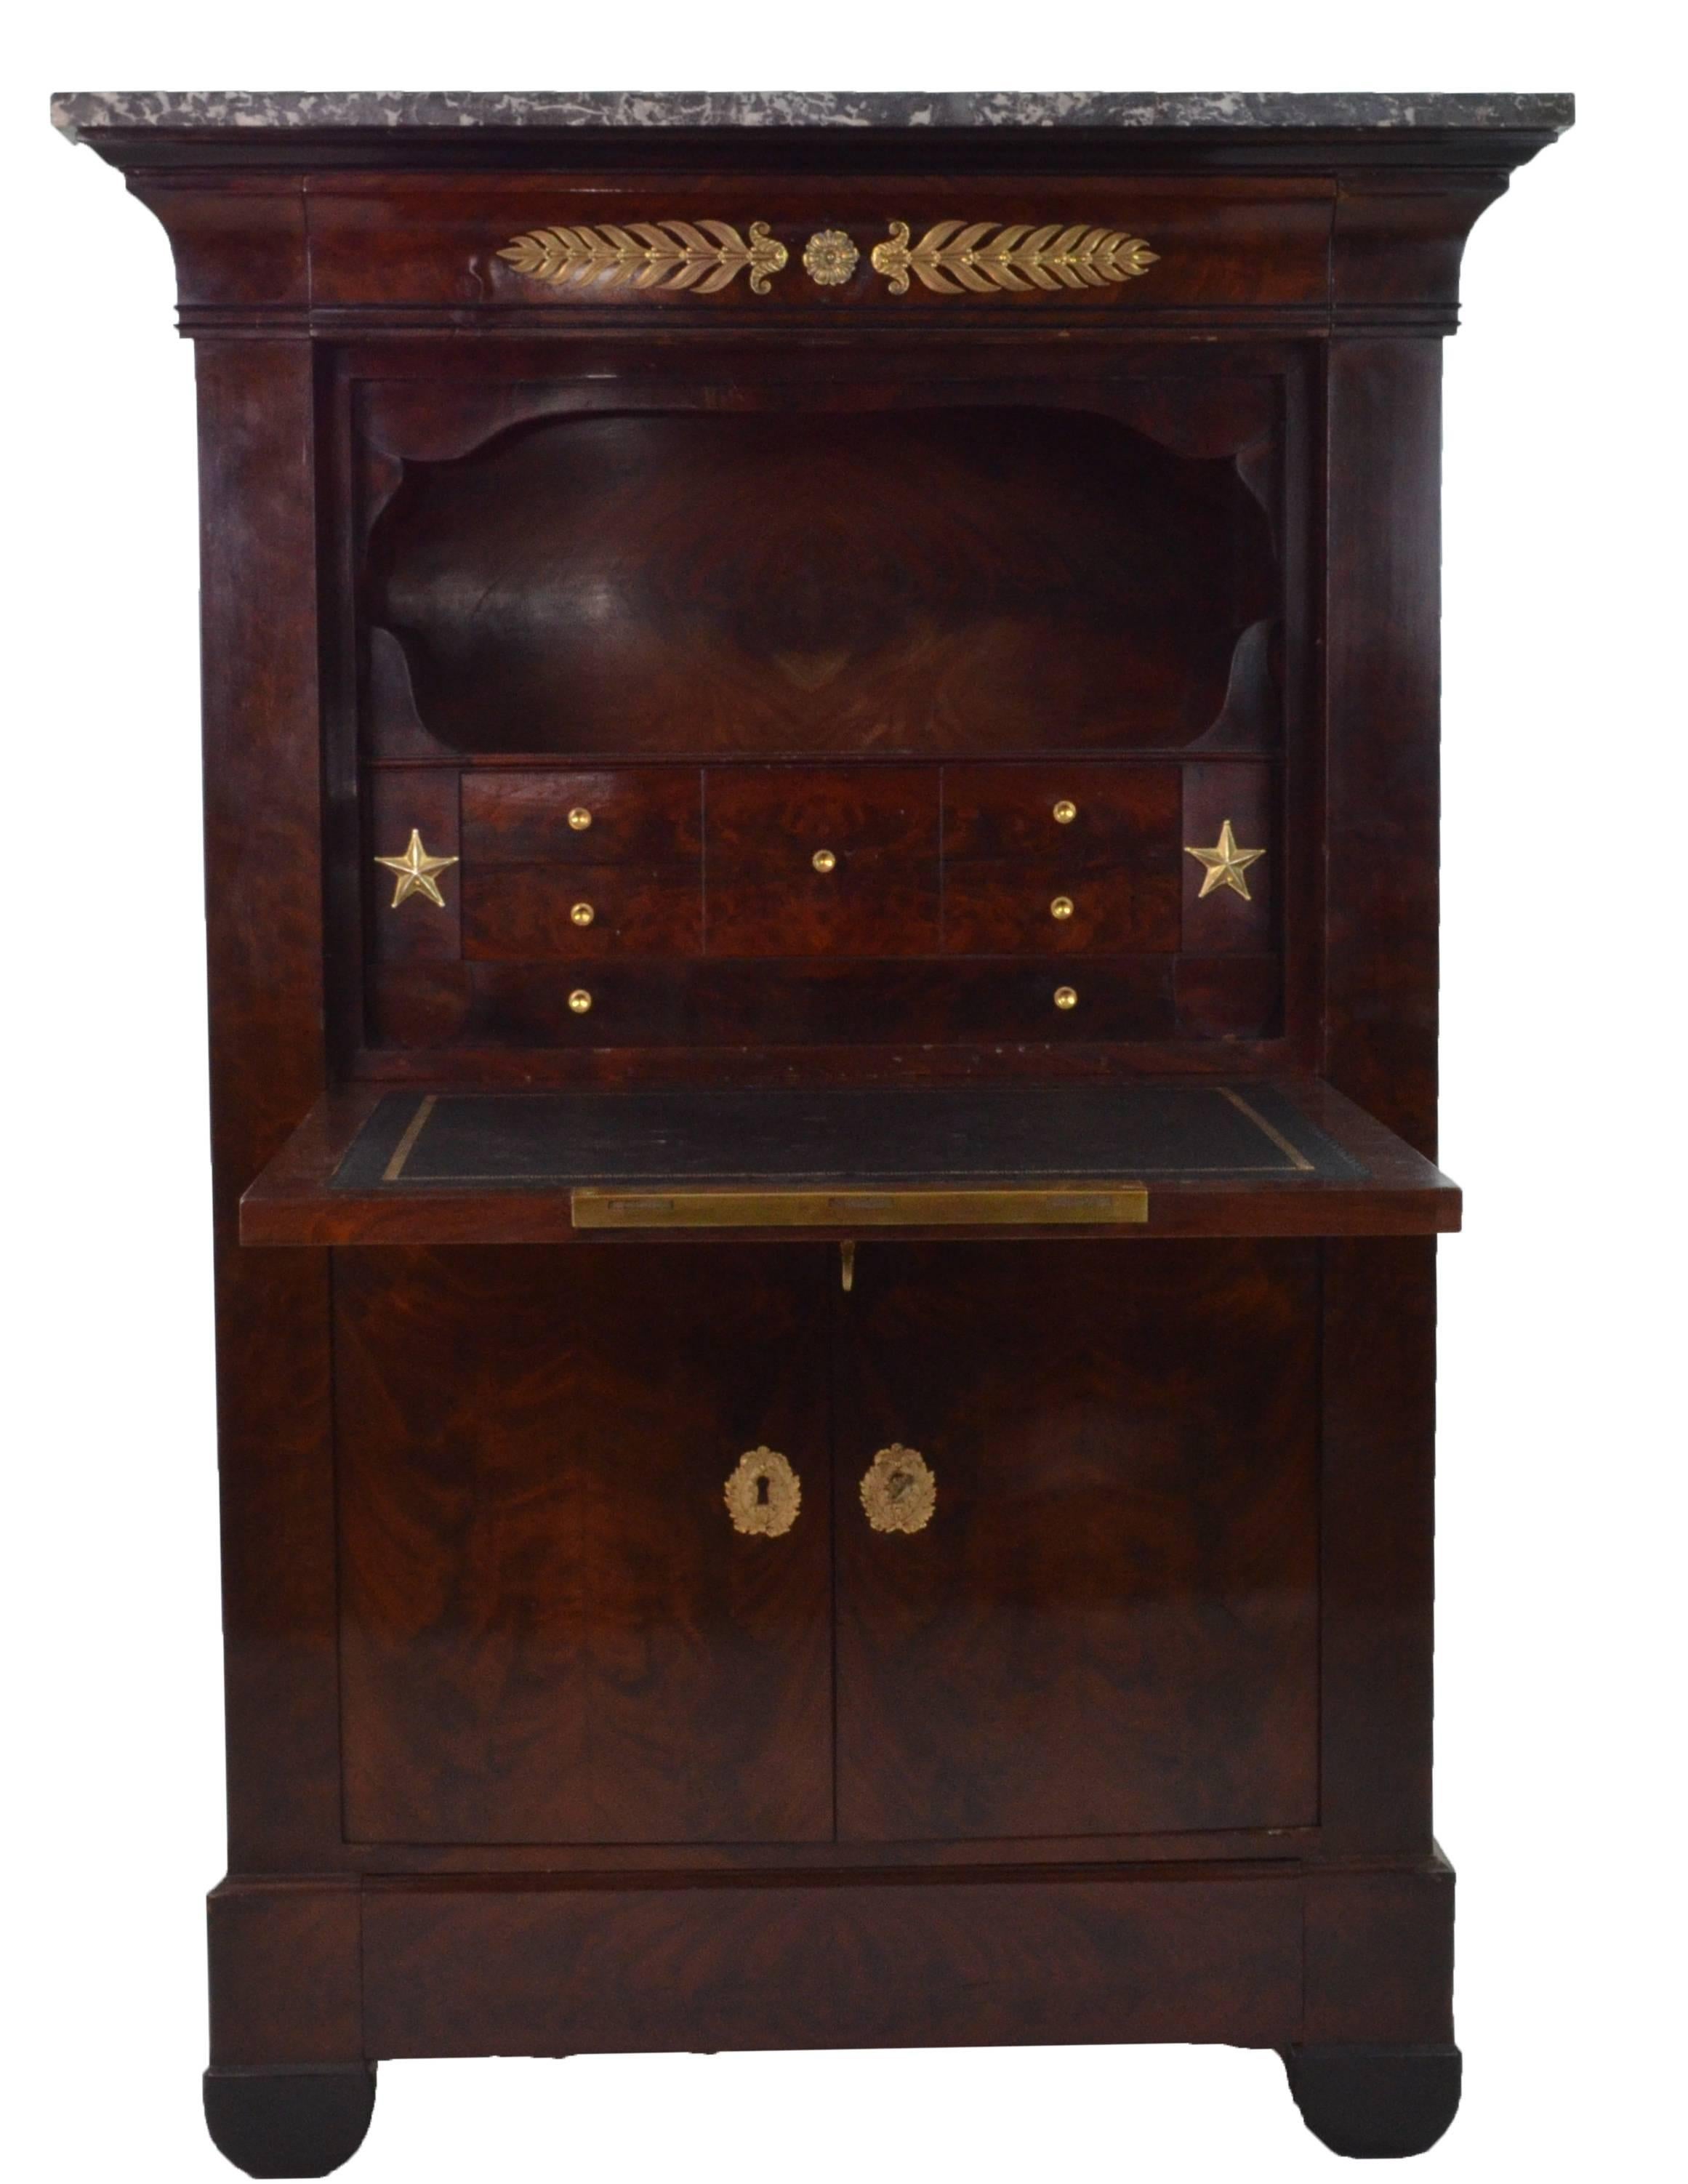 Empire Mahogany veneered folding desk secretaire. The folding desk is covered with recent black leather. There are some drawers both in the upper part, behind the folding door and in the lower part behind two doors. 
Hardware and locks are